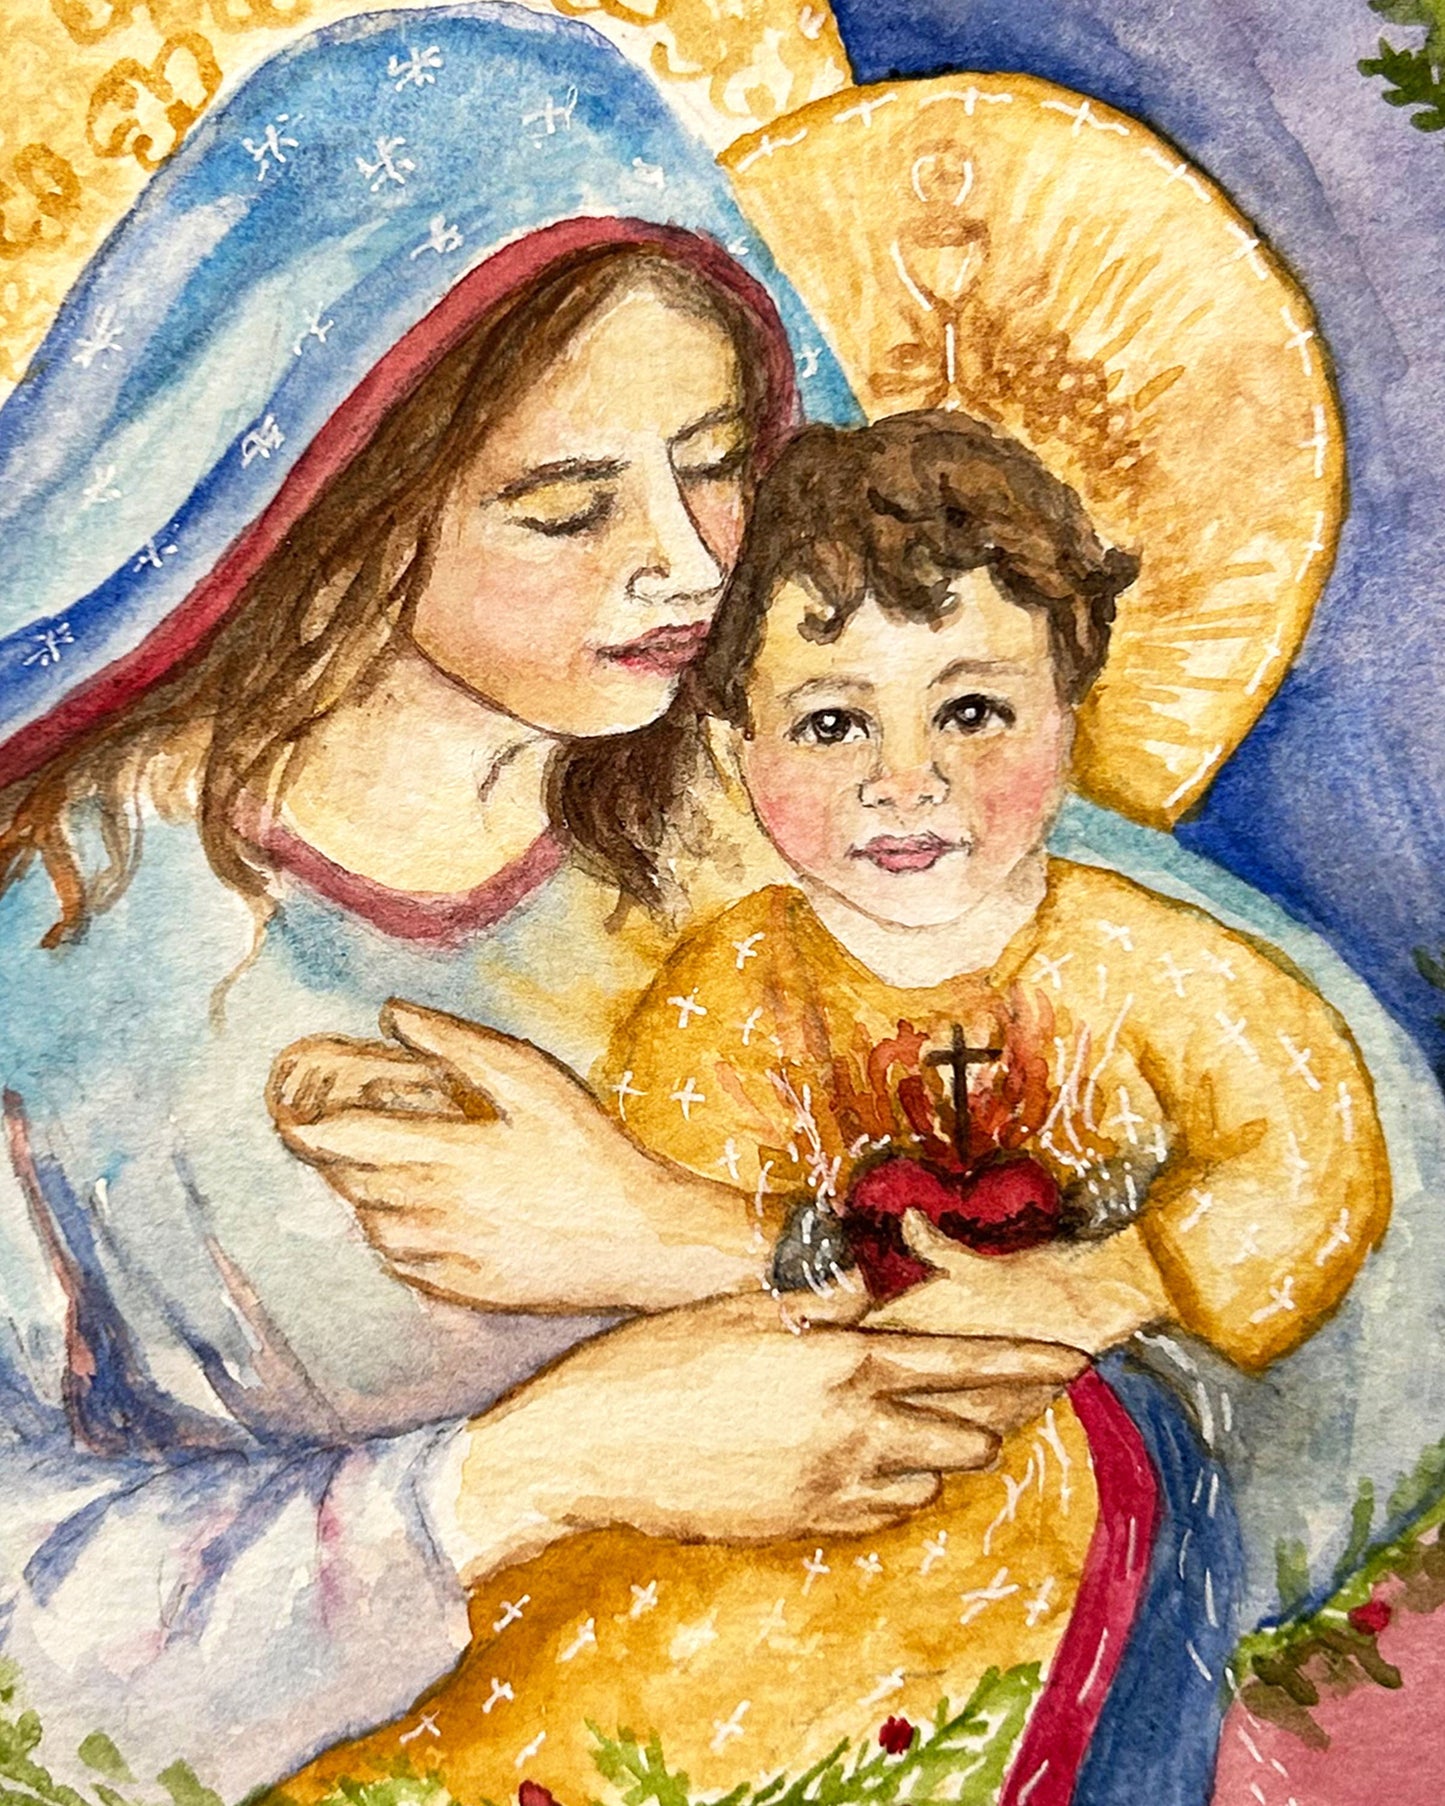 The Merciful Heart of the Christ Child